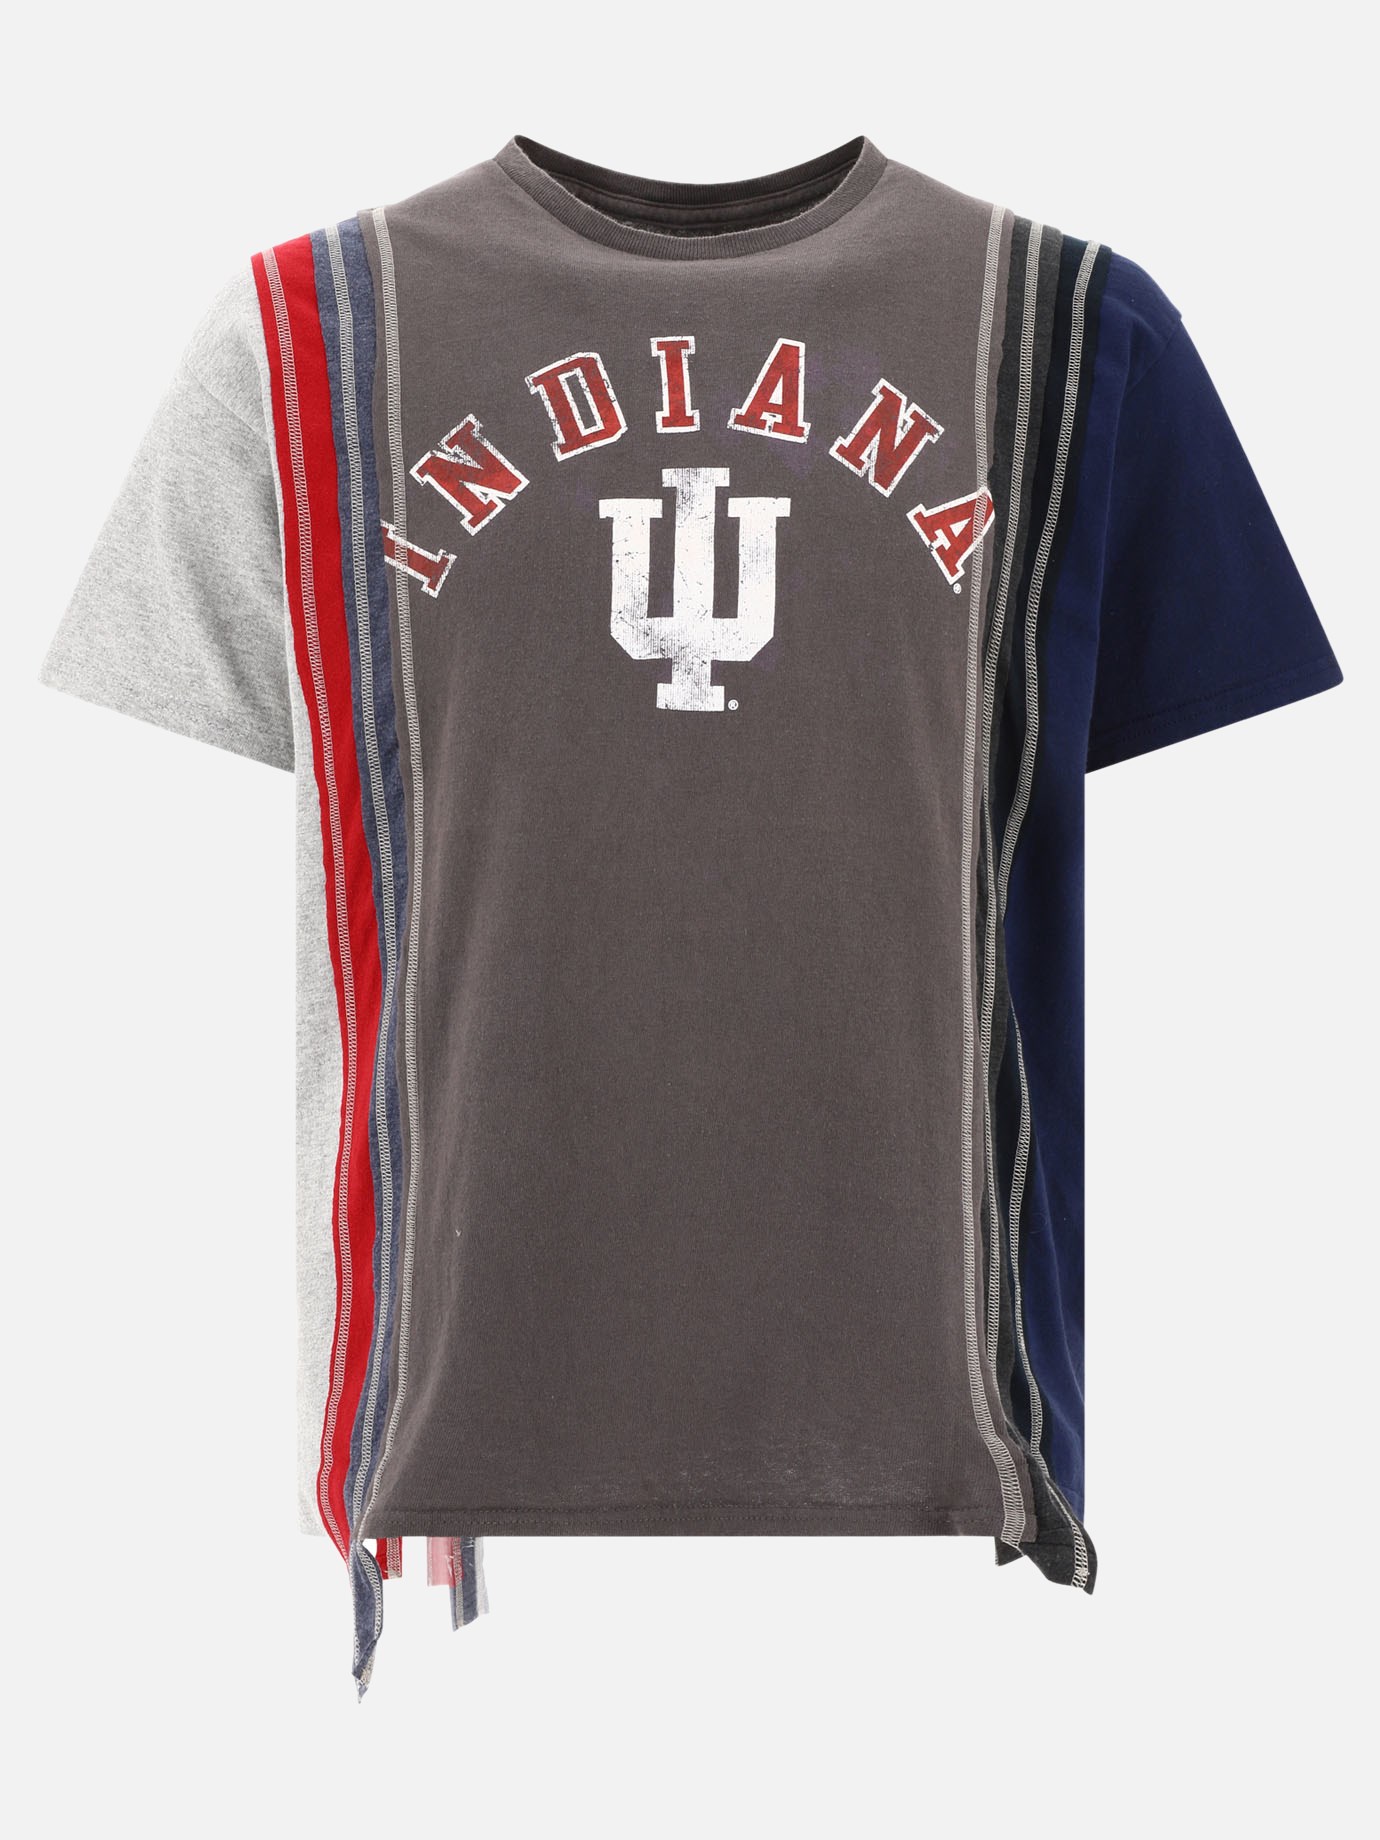 T-shirt  Rebuild Indiana by Needles - 2